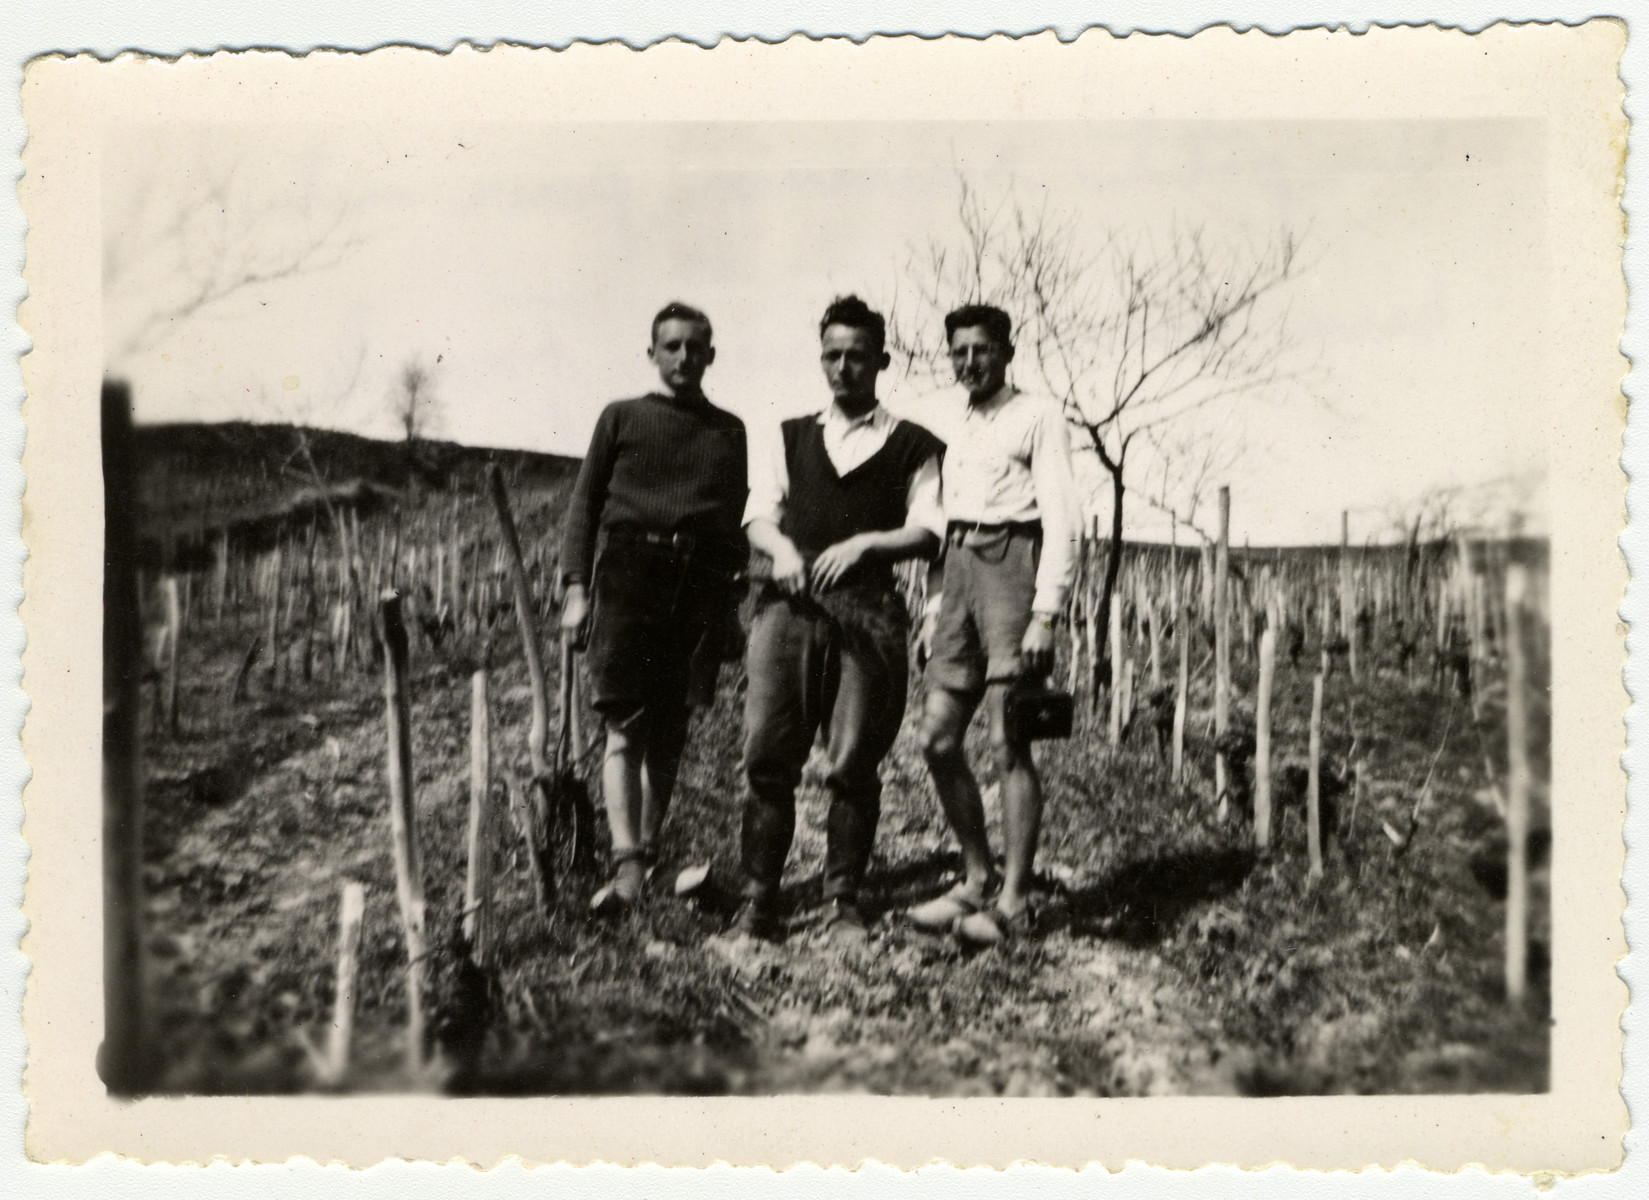 Three young men stand in the garden of the children's home Chateau de La Hille. 

Pictured are Leo Lewin, Alex Frank, who had been colony director from 1940 to 1941, and Kurt Moser. Lewin escaped illegally to Switzerland in 1943. Frank hiked to safety across the Pyrenees in 1943 and Moser was caught and deported to Auschwitz where he died from typhus in 1943.